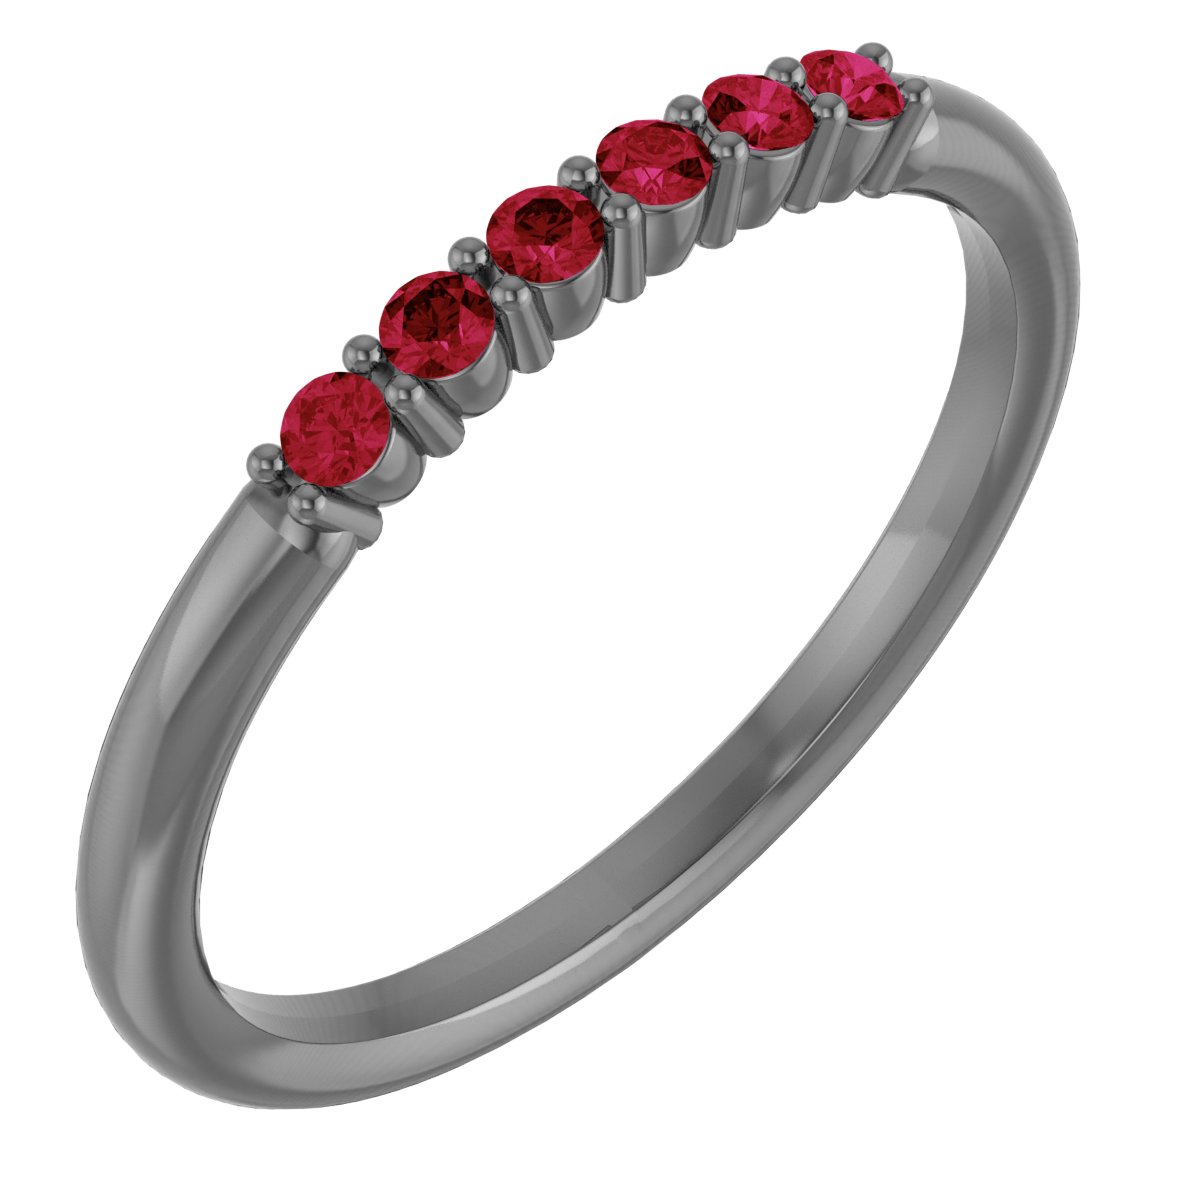 14K Yellow Ruby Stackable Ring Ref 14621139